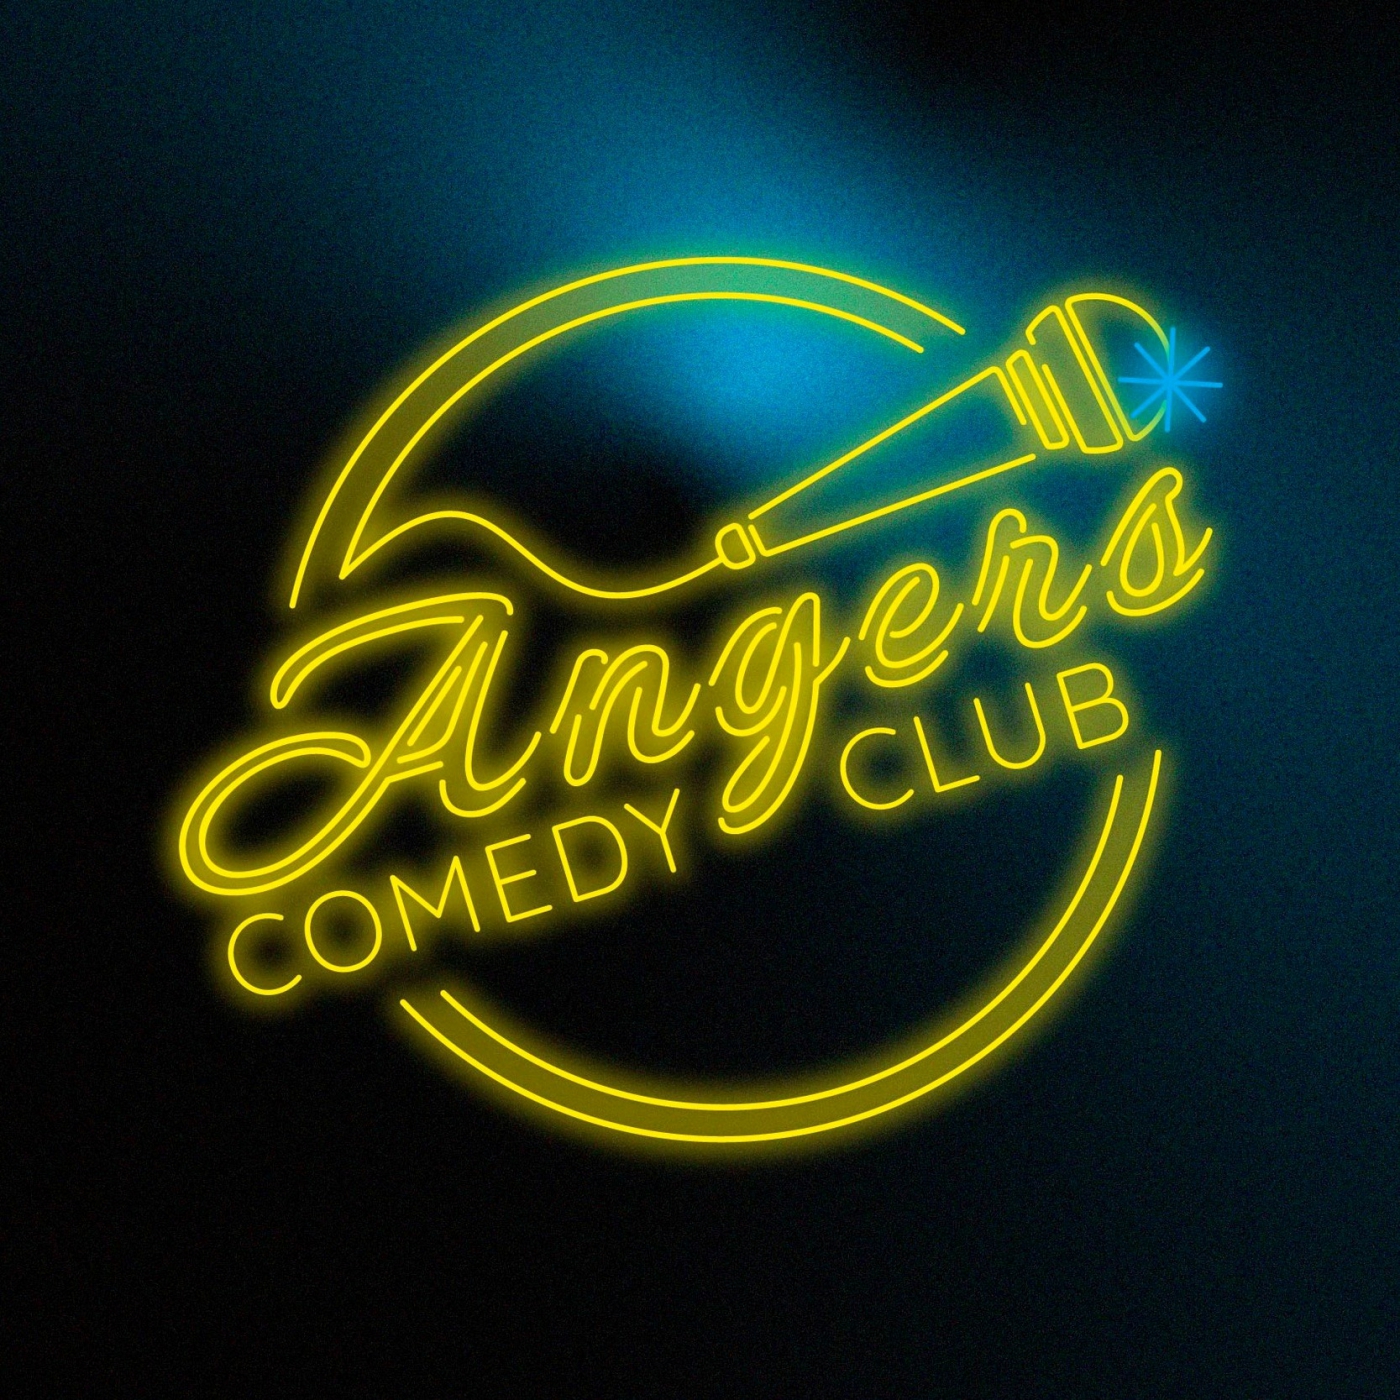 Angers comedy club partenaires Angers comedy club